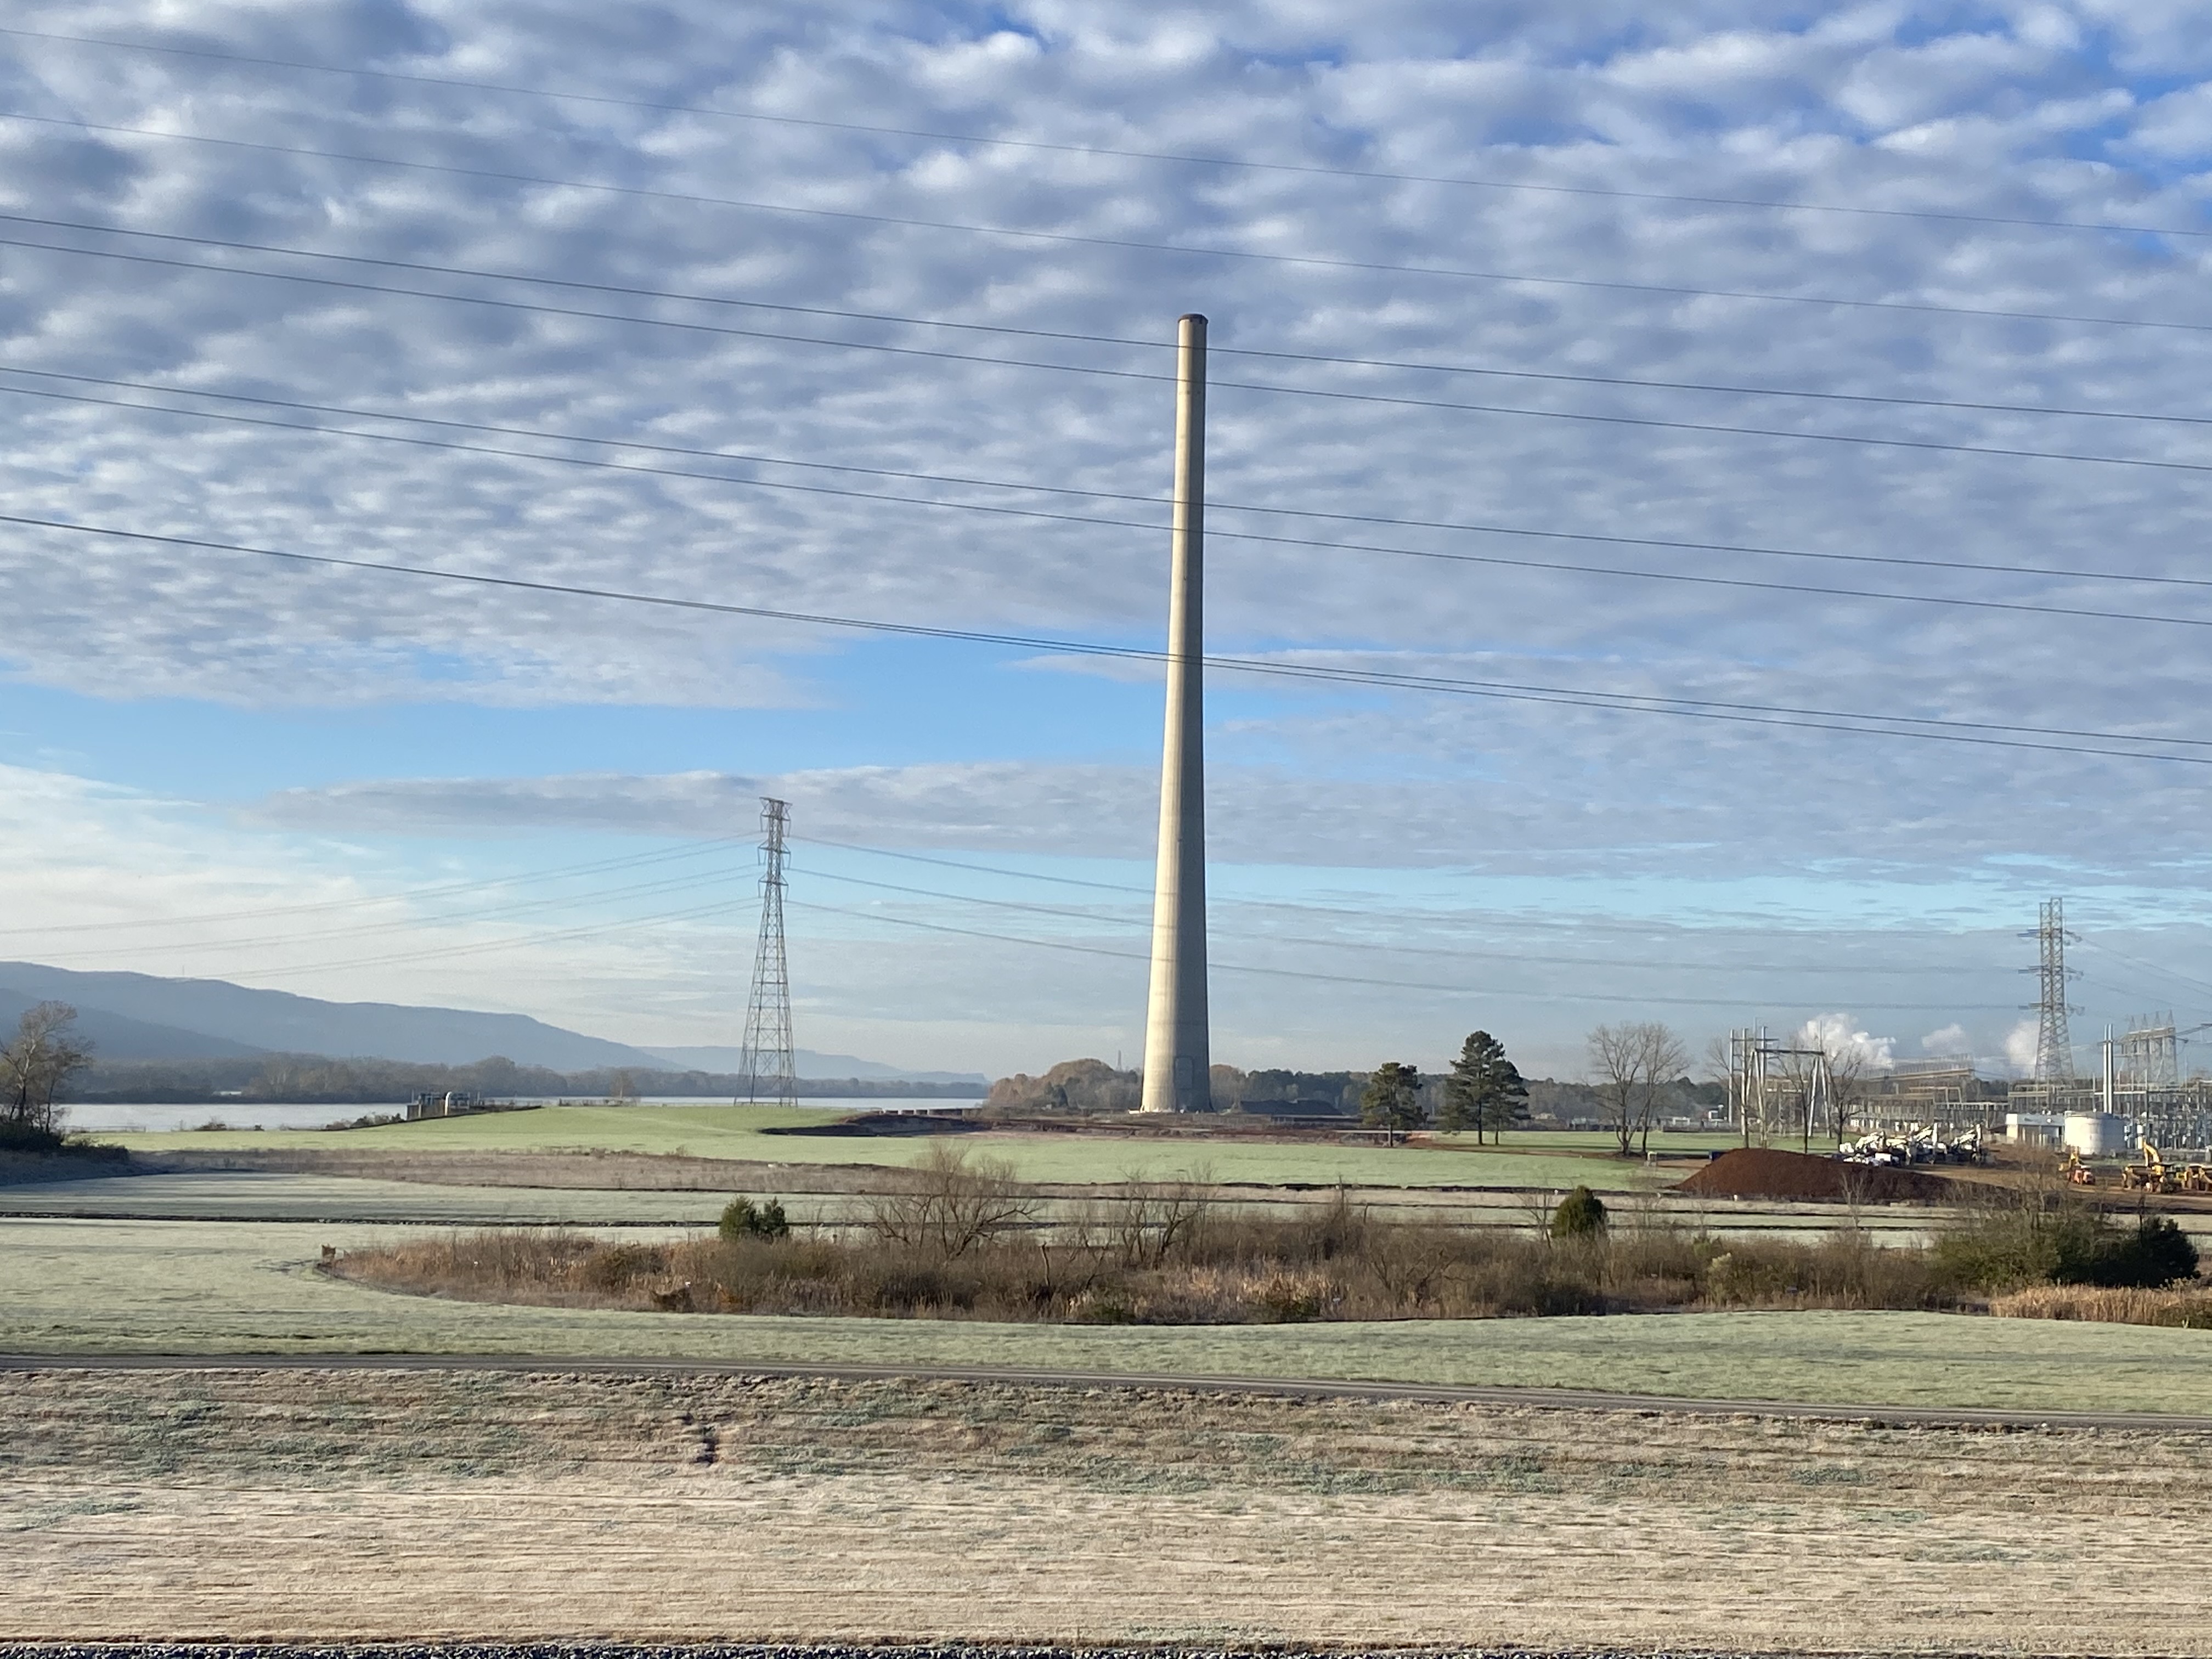 widows creek fossil plant stack before implosion